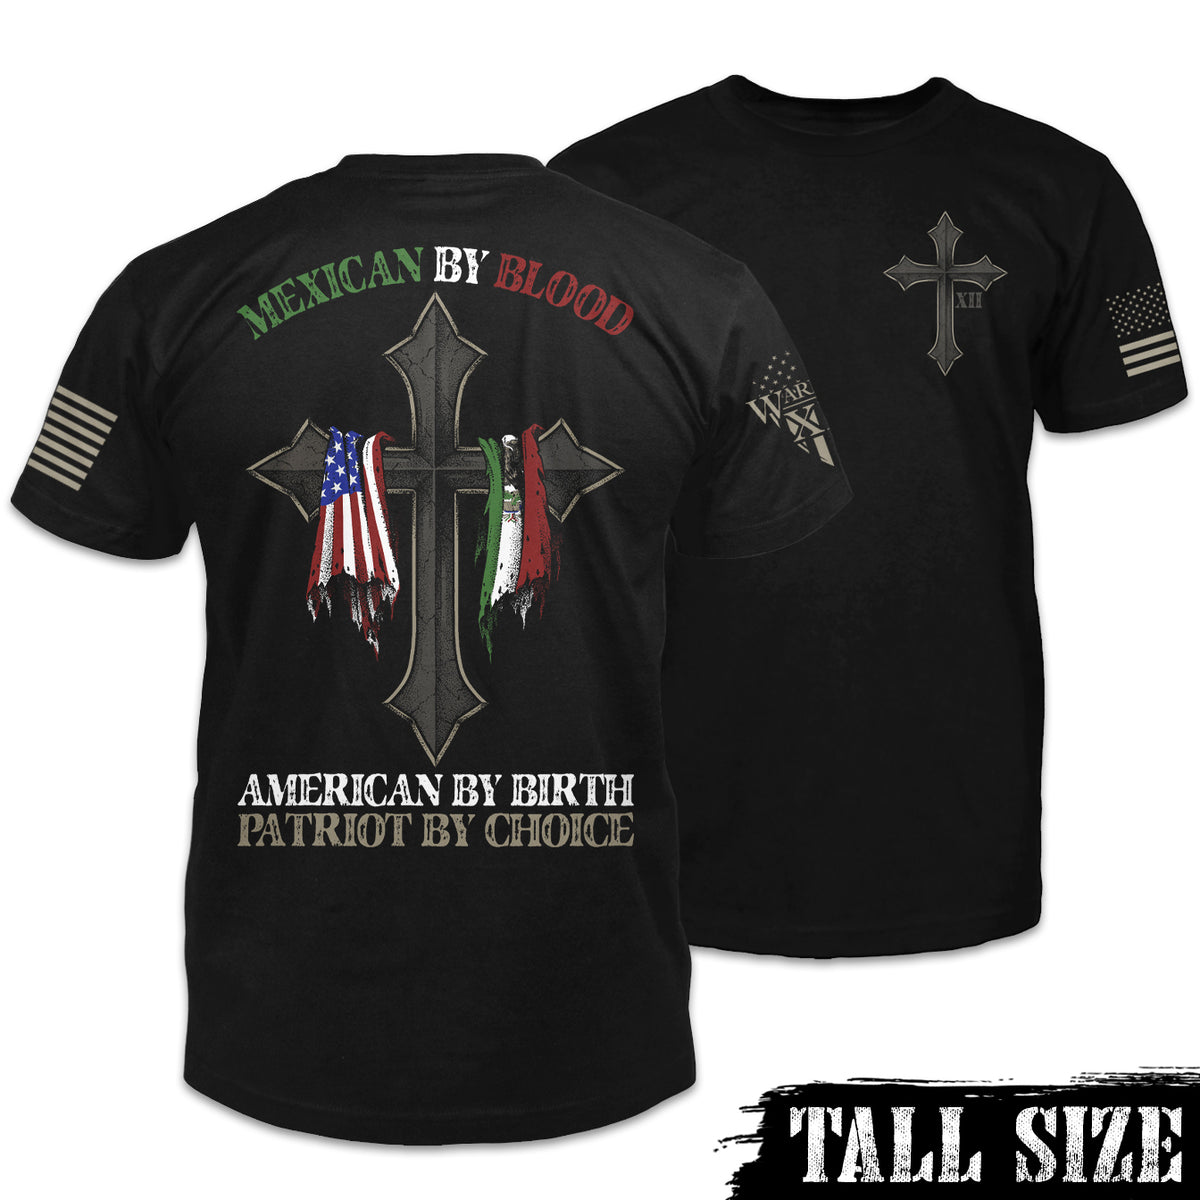 Front & back black tall size shirt with the words "Mexican by blood, American by birth, patriot by choice" with a cross holding the American and Mexican flag printed on the shirt.